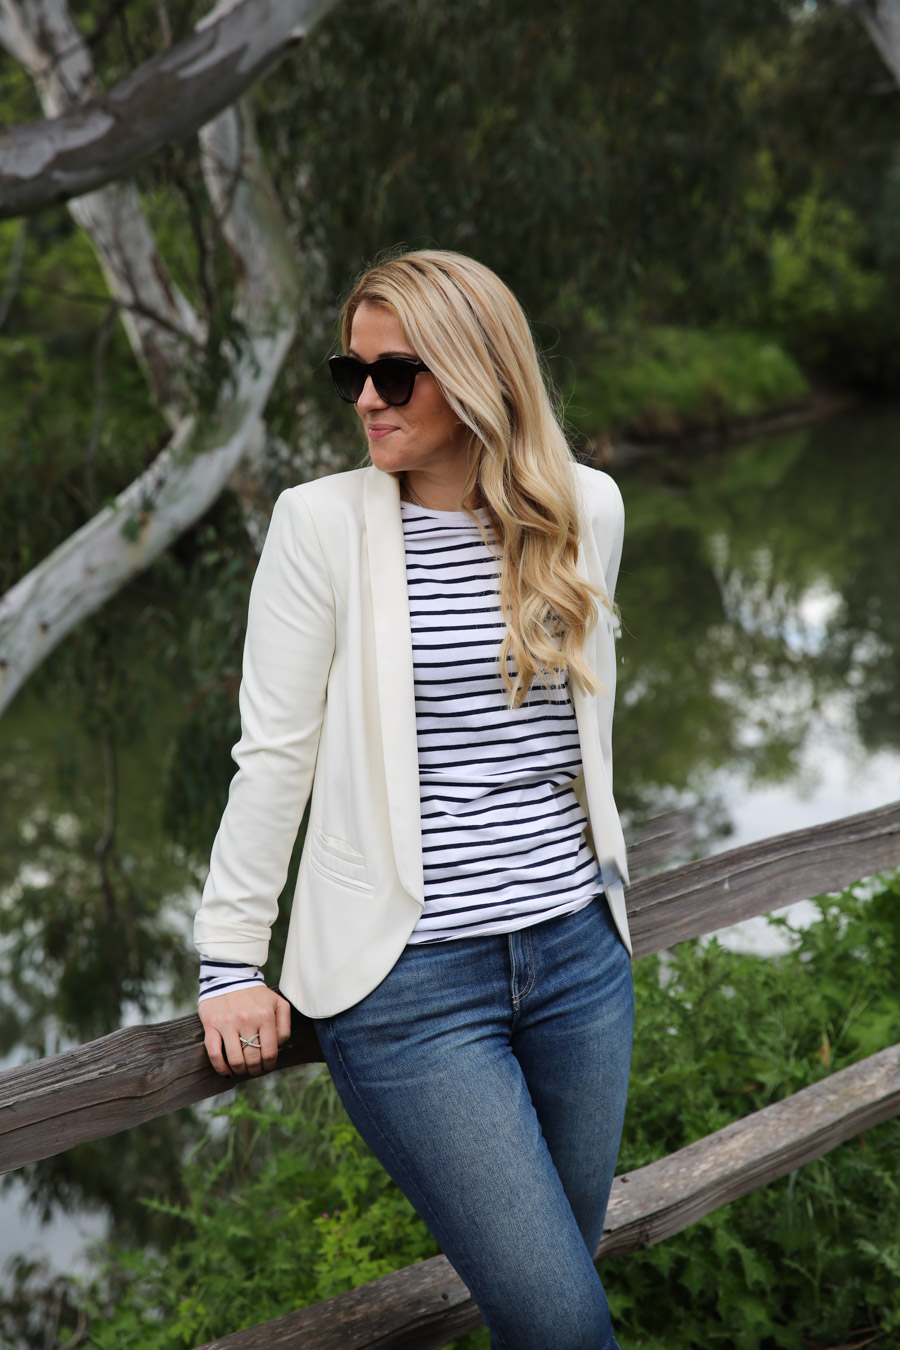 What to Wear in Wine Country - Striped Shirt + White Blazer